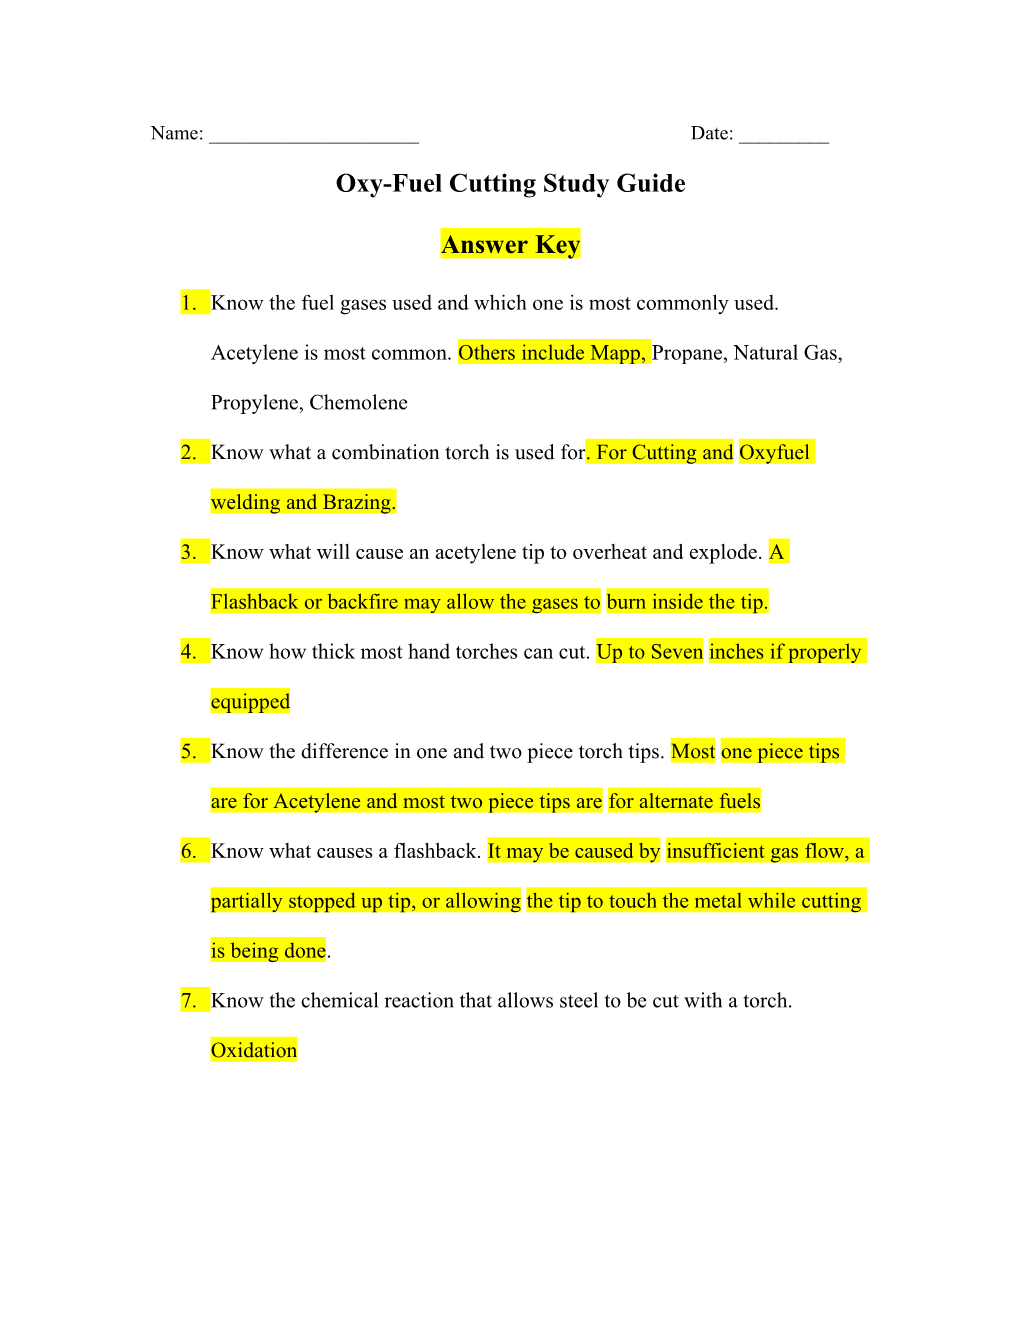 Oxy-Fuel Cutting Study Guide